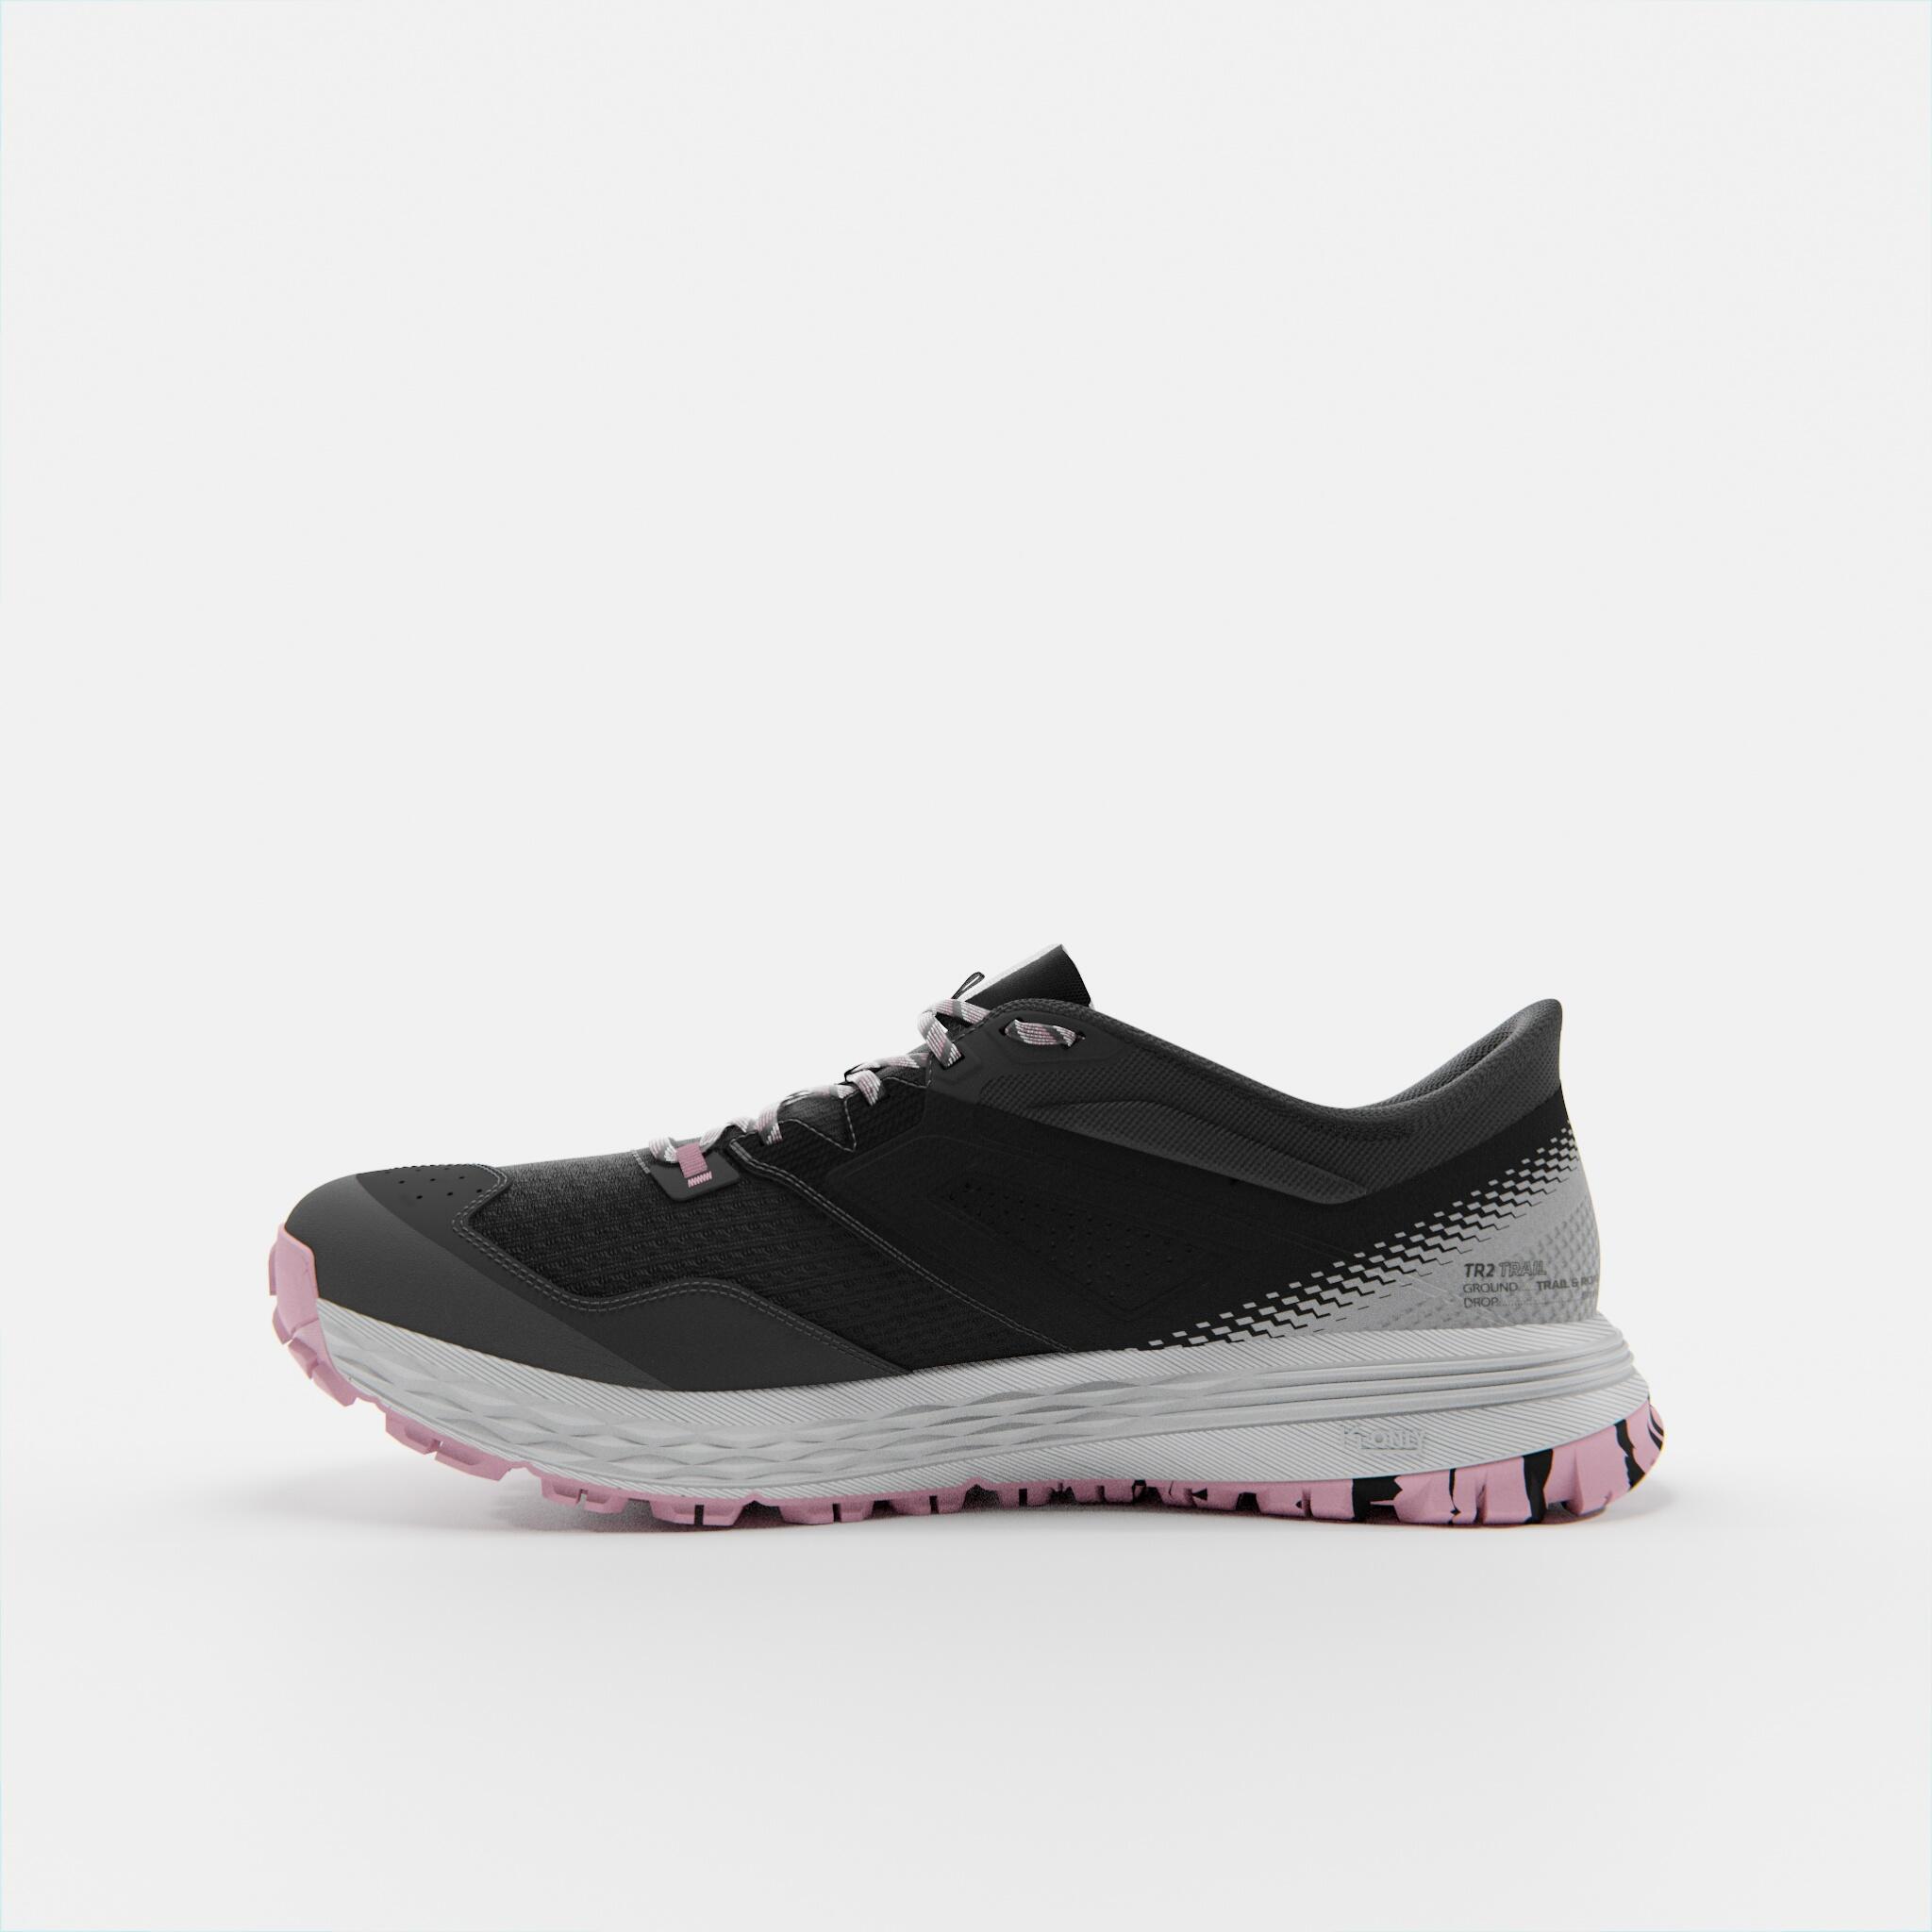 WOMEN's TRAIL RUNNING SHOES TR2 - carbon grey button/pink 3/8